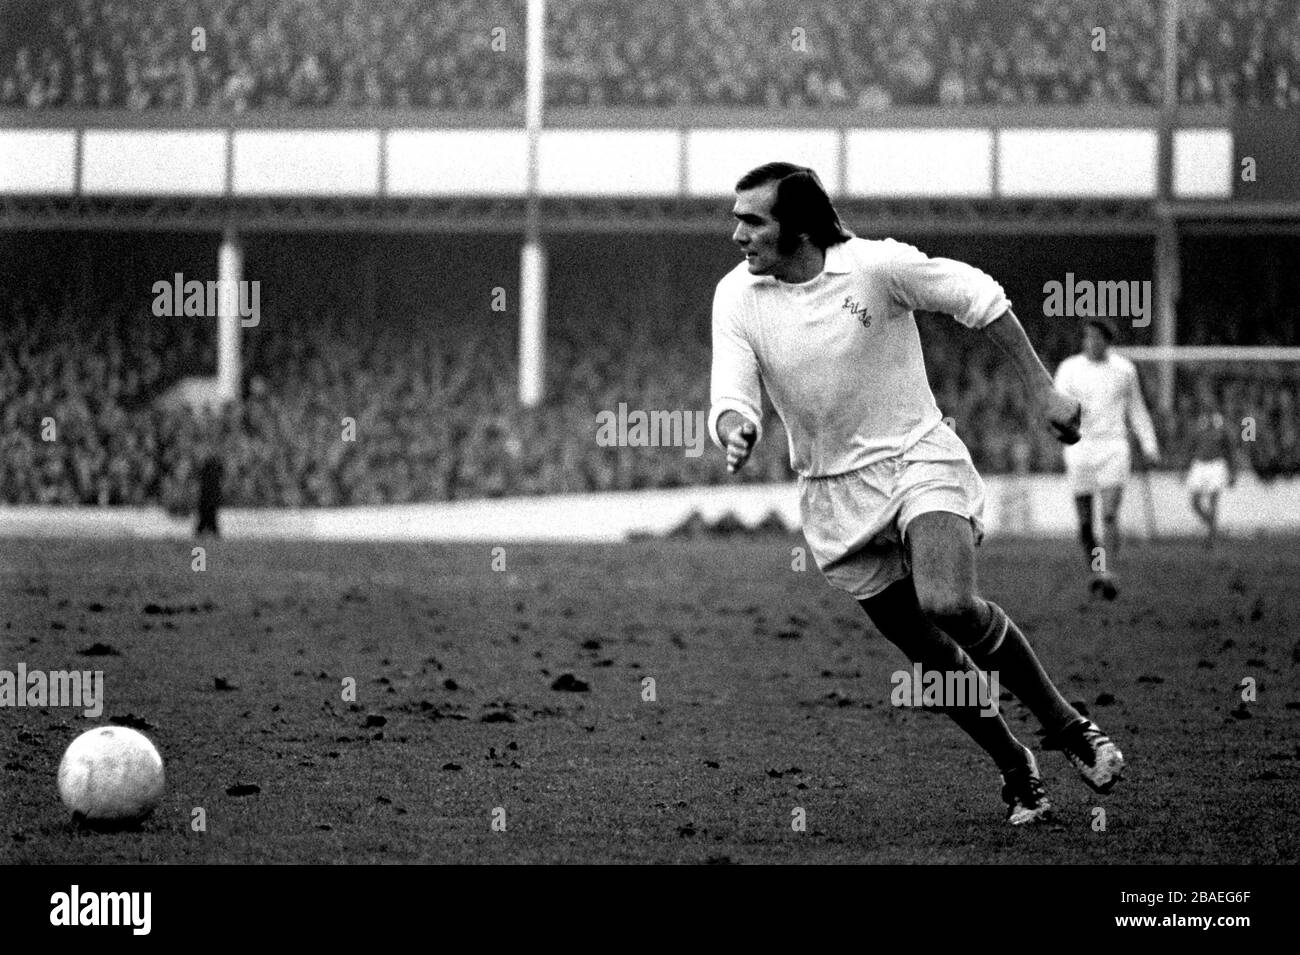 English footballer Terry Cooper of team Leeds United FC 1974 OLD PHOTO 